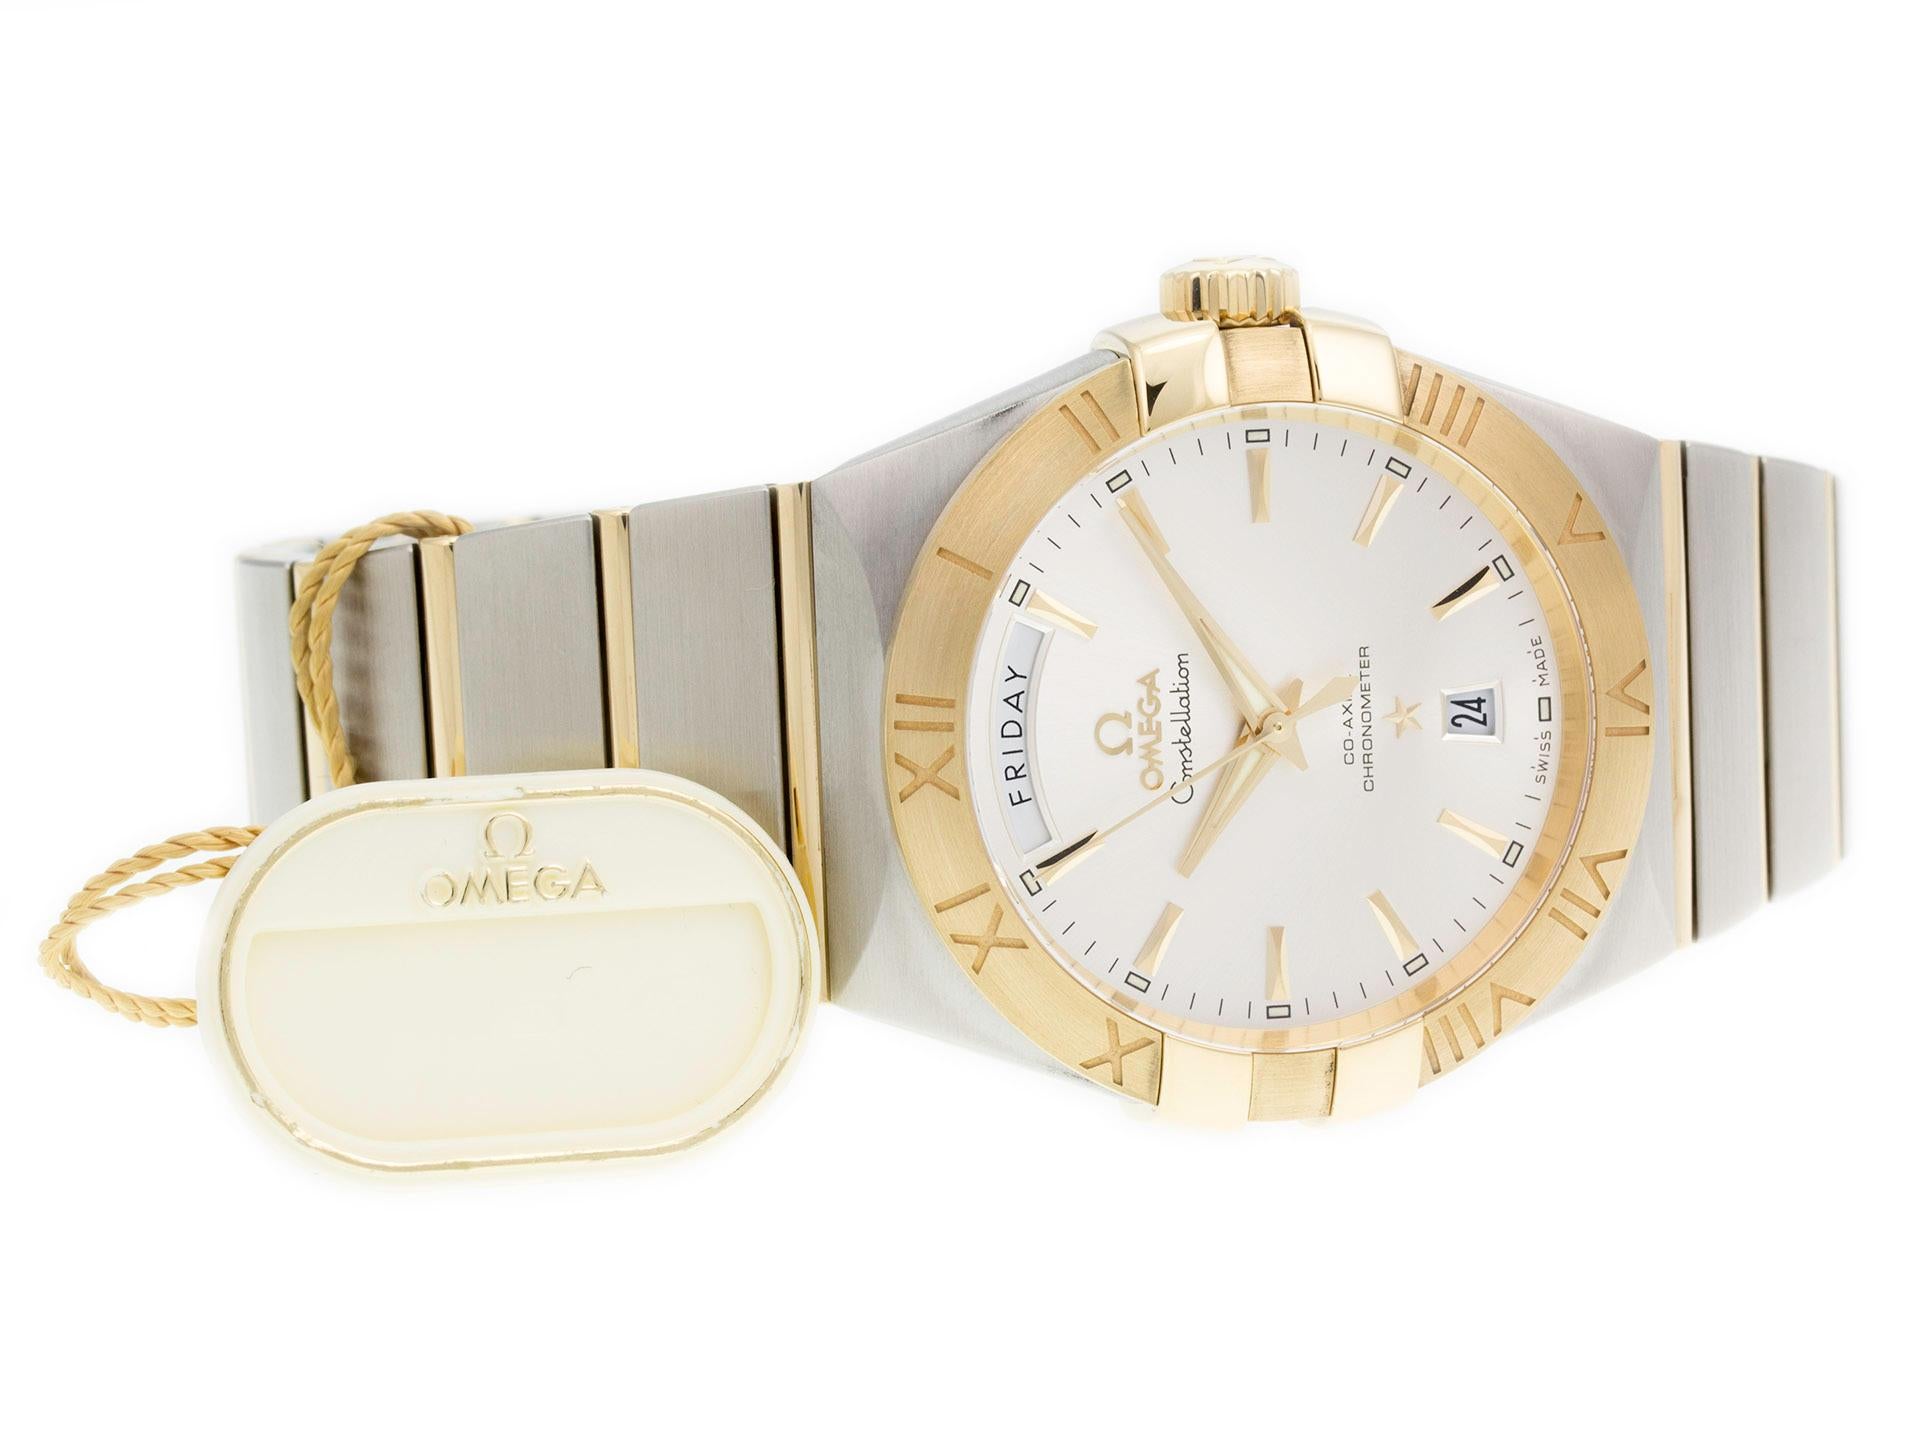 Omega Constellation 123.20.38.22.02.002 watch, with Fixed, Brushed 18K Yellow Gold w/ Roman Numerals & Polished Griffes Bezel, Brushed Stainless Steel & Polished 18K Yellow Gold Bracelet and water resistant to 100m, with day, and